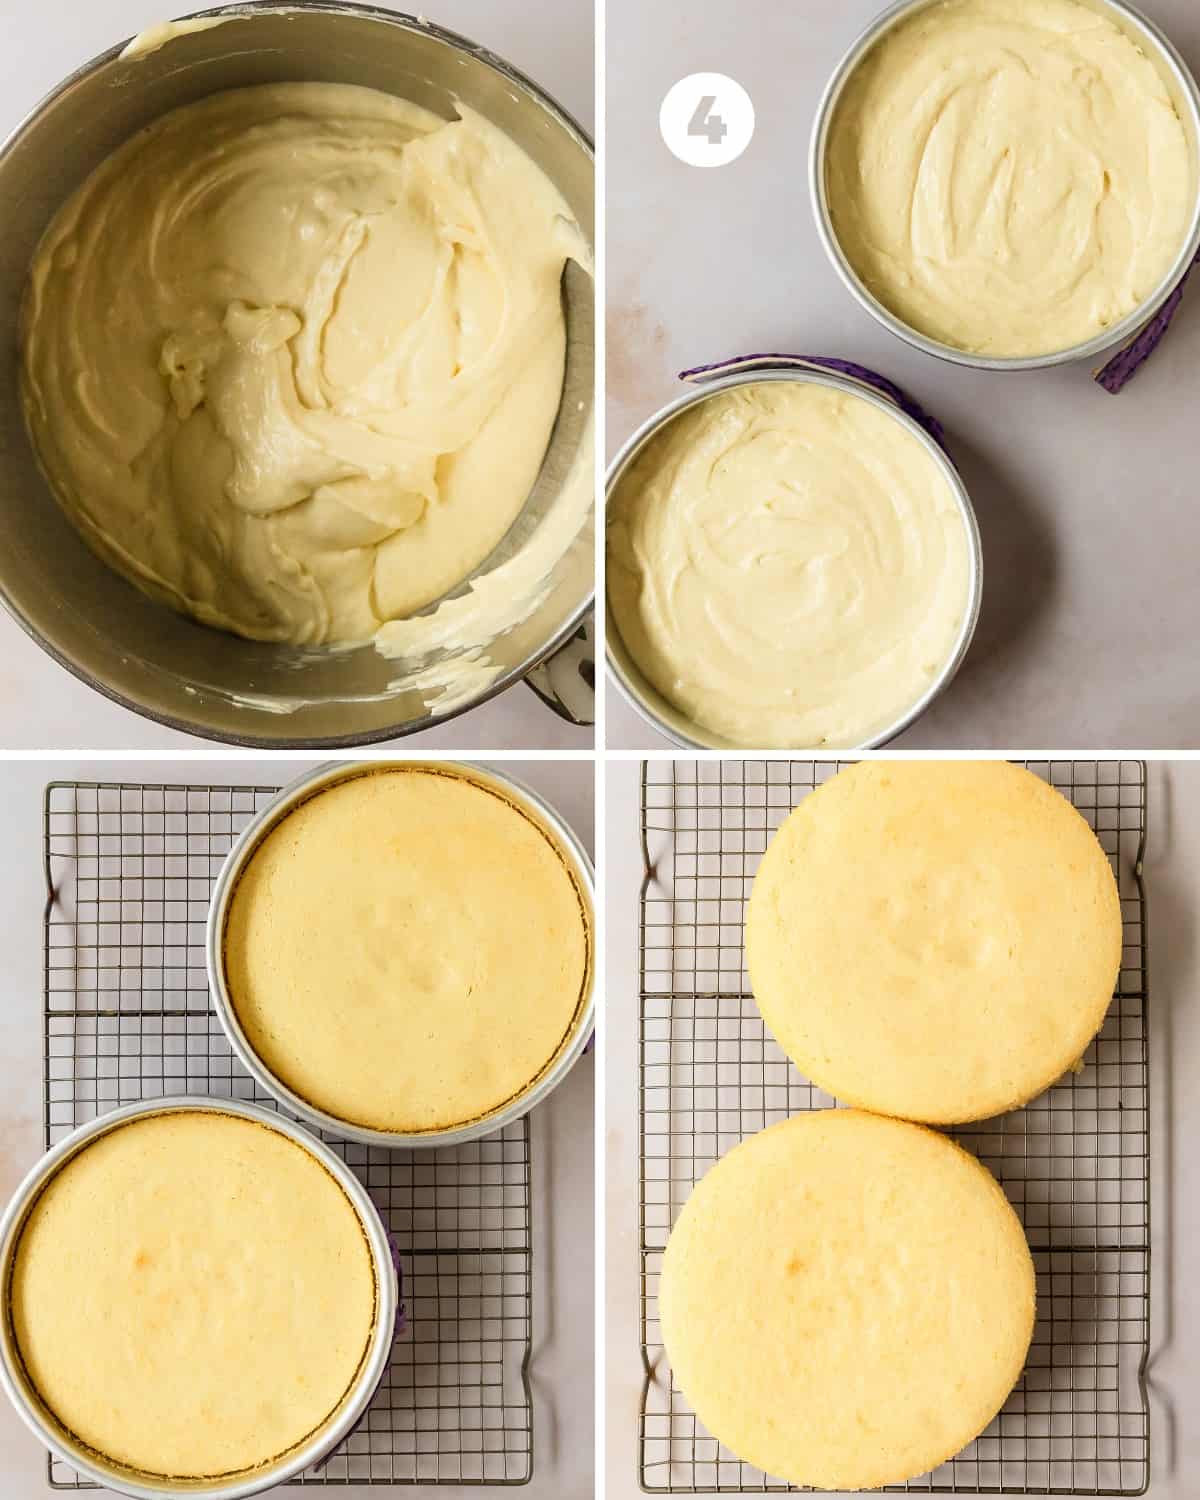 Evenly scoop the lemon cake batter into the prepared pans (the total weight of the cake is about 1210 g). Bake the moist vanilla and lemon cake for 28 - 32 minutes or until a toothpick inserted into the center of the cake comes out clean or with a few moist crumbs. Cool the cakes in the pan for 10 minutes. Remove the cakes from the pan to cool completely on a cooling rack. Loosely wrap the cakes in plastic wrap to chill in the fridge for an hour. The cakes must be completely cooled before applying the frosting. 